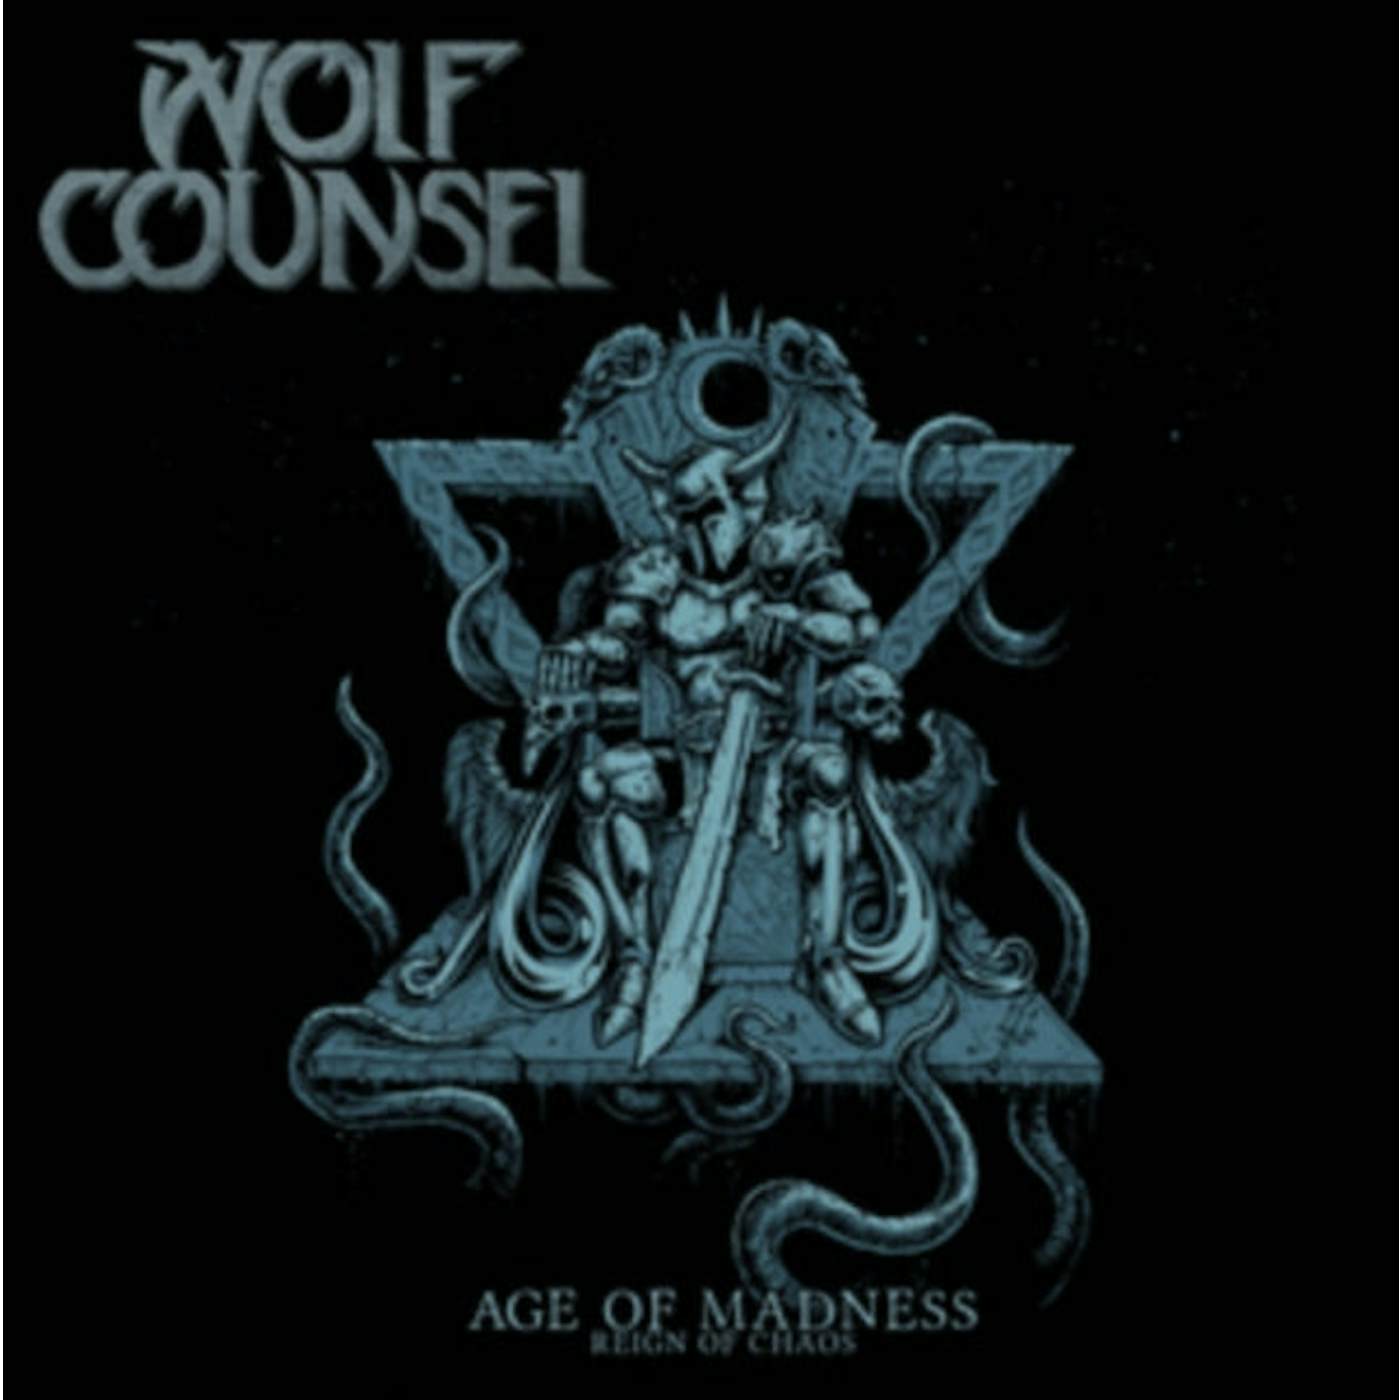 Wolf Counsel LP - Age Of Madness / Reign Of Chaos (Vinyl)